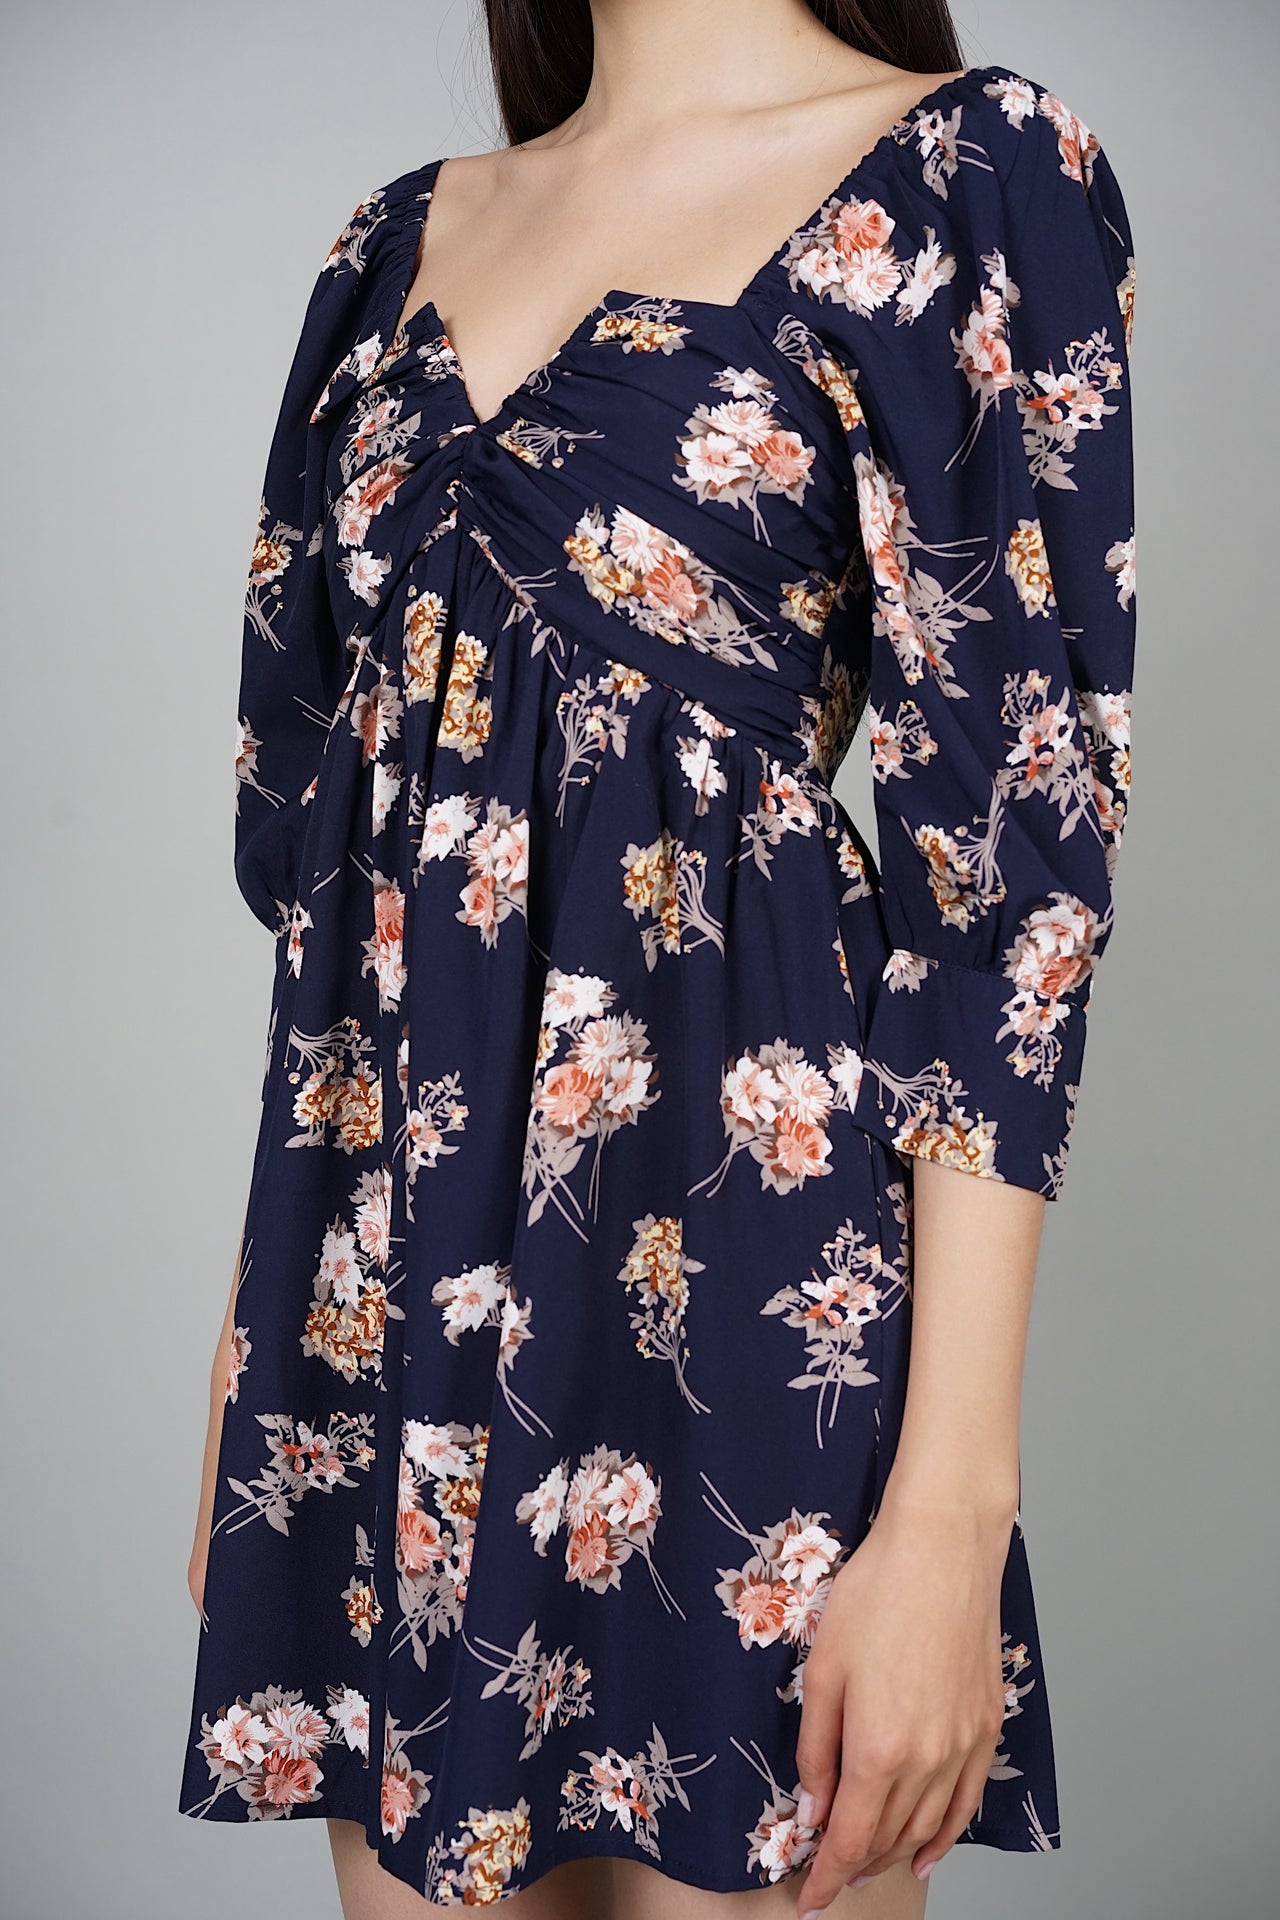 Julissa Gathered Puffy Dress in Navy Floral